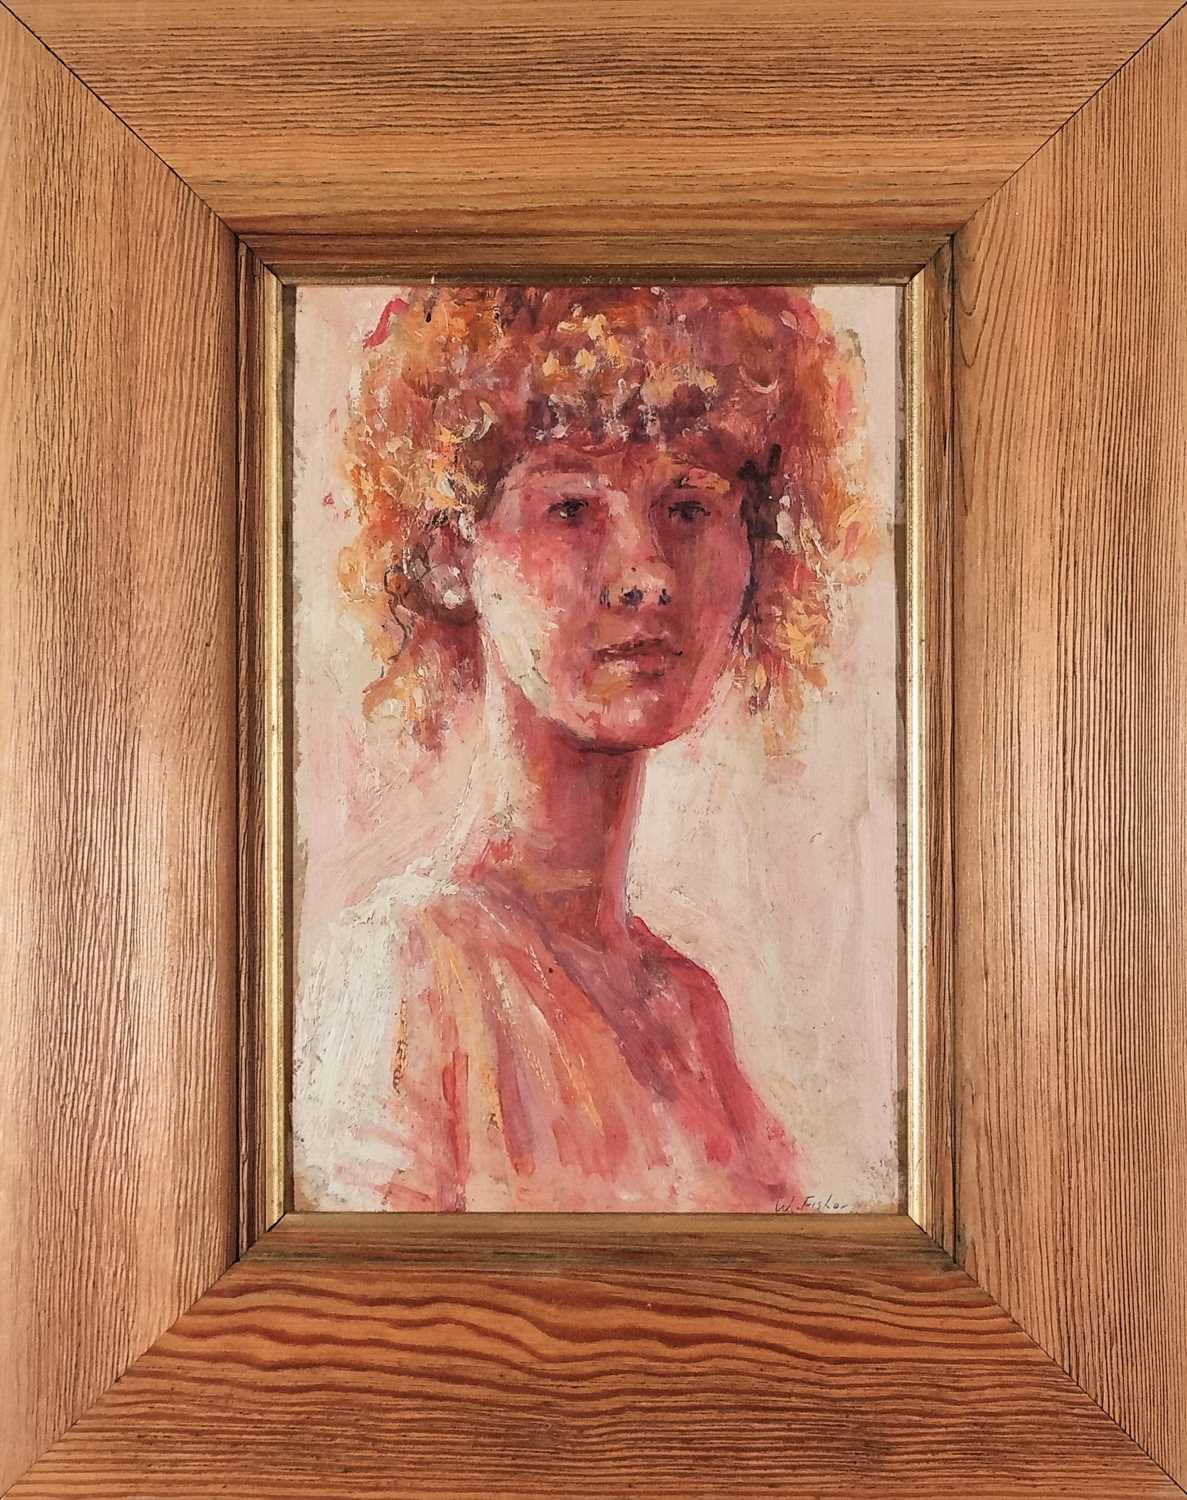 ƚ William (Bill) FISHER (British 20th Century) Portrait of a Young Girl, Oil on card, Signed lower - Image 2 of 3